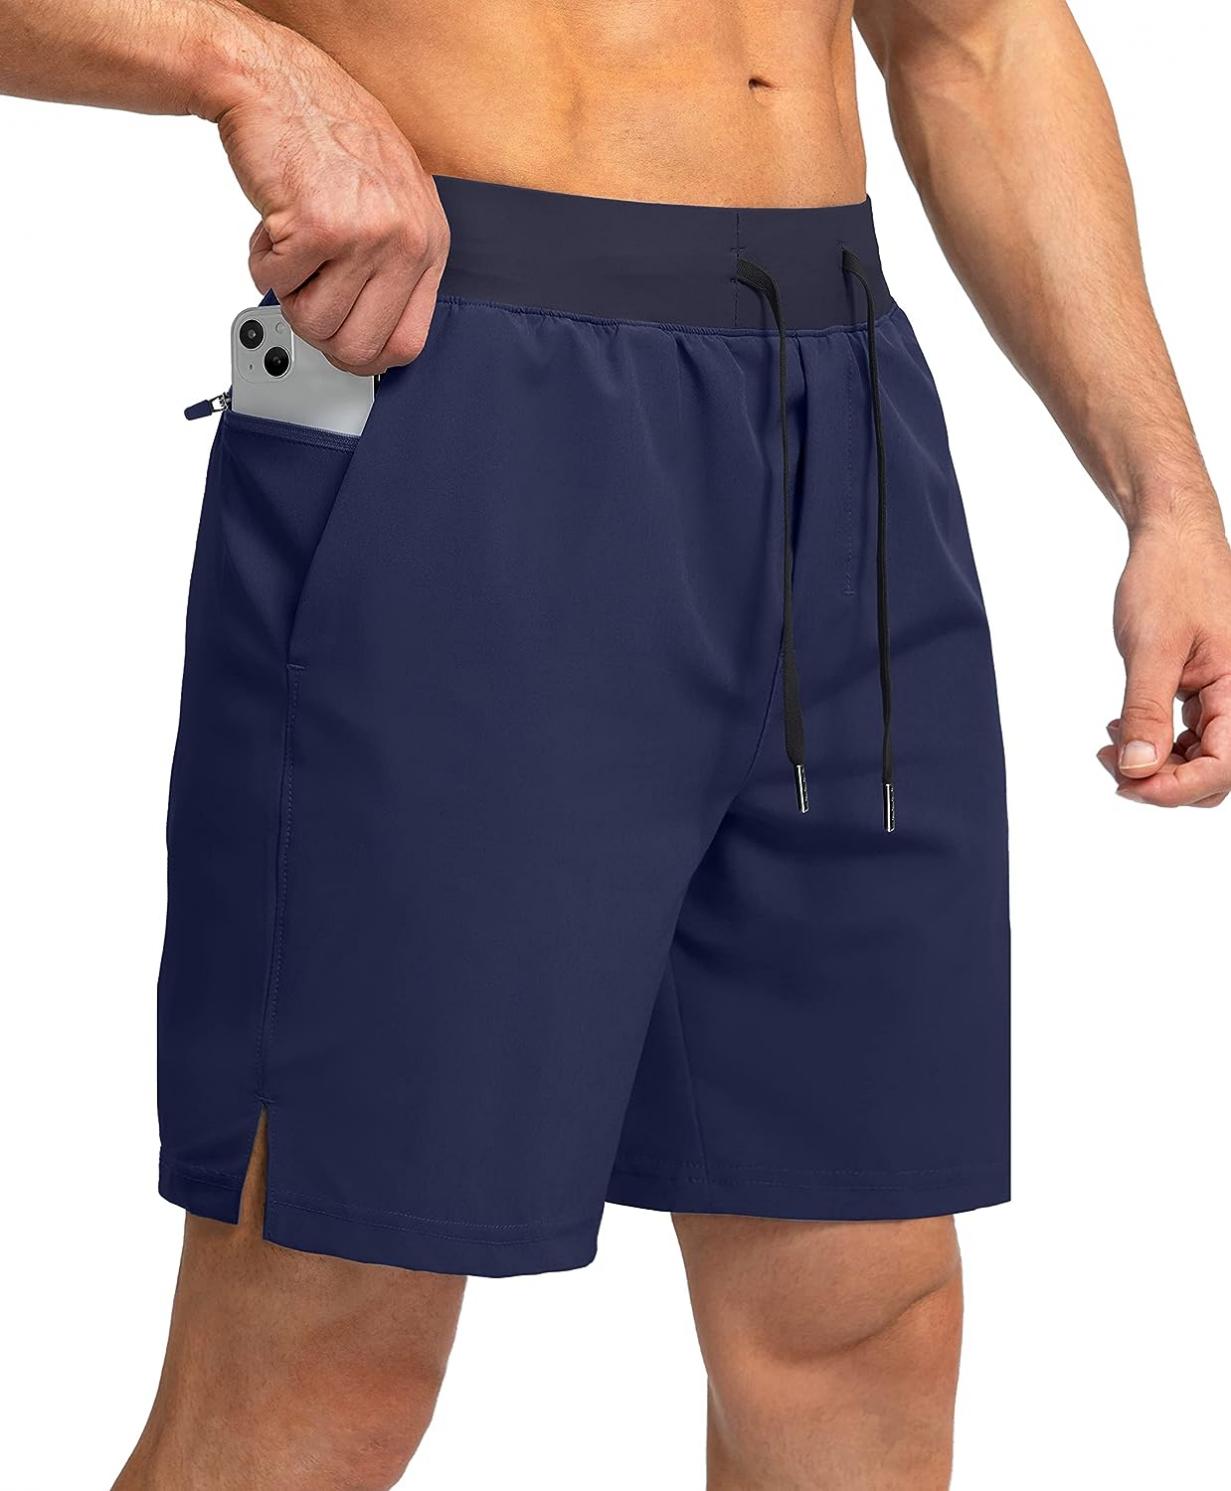 Men's Running Shorts with Zipper Pockets 7 Inch Lightweight Quick Dry Gym Workout Athletic Shorts for Men